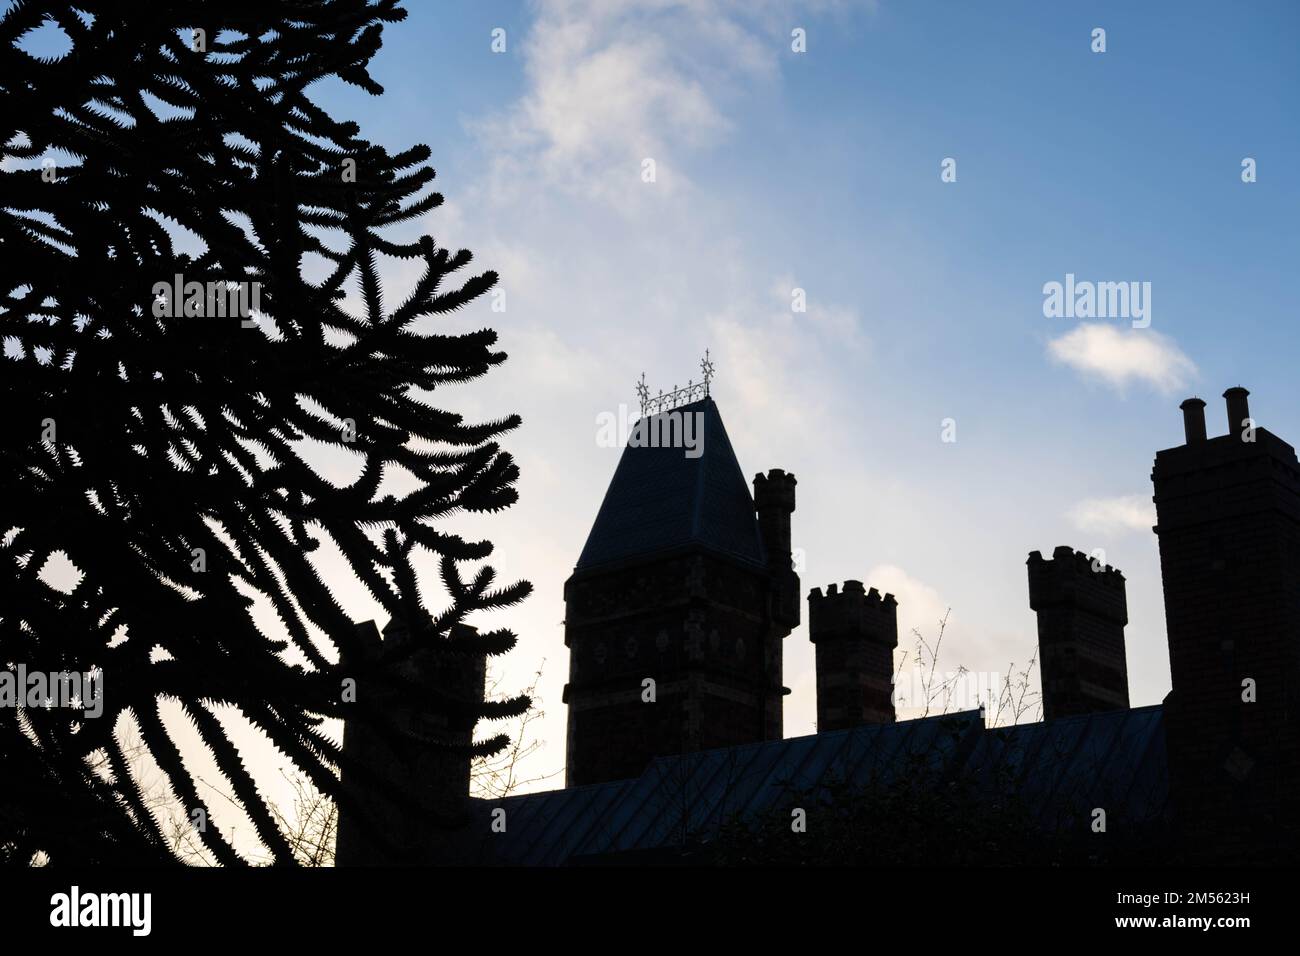 Silhouette of Saltwell Towers, built in 1862, in the public park - Saltwell Park in Gateshead, UK, with adjacent monkey puzzle tree. Stock Photo